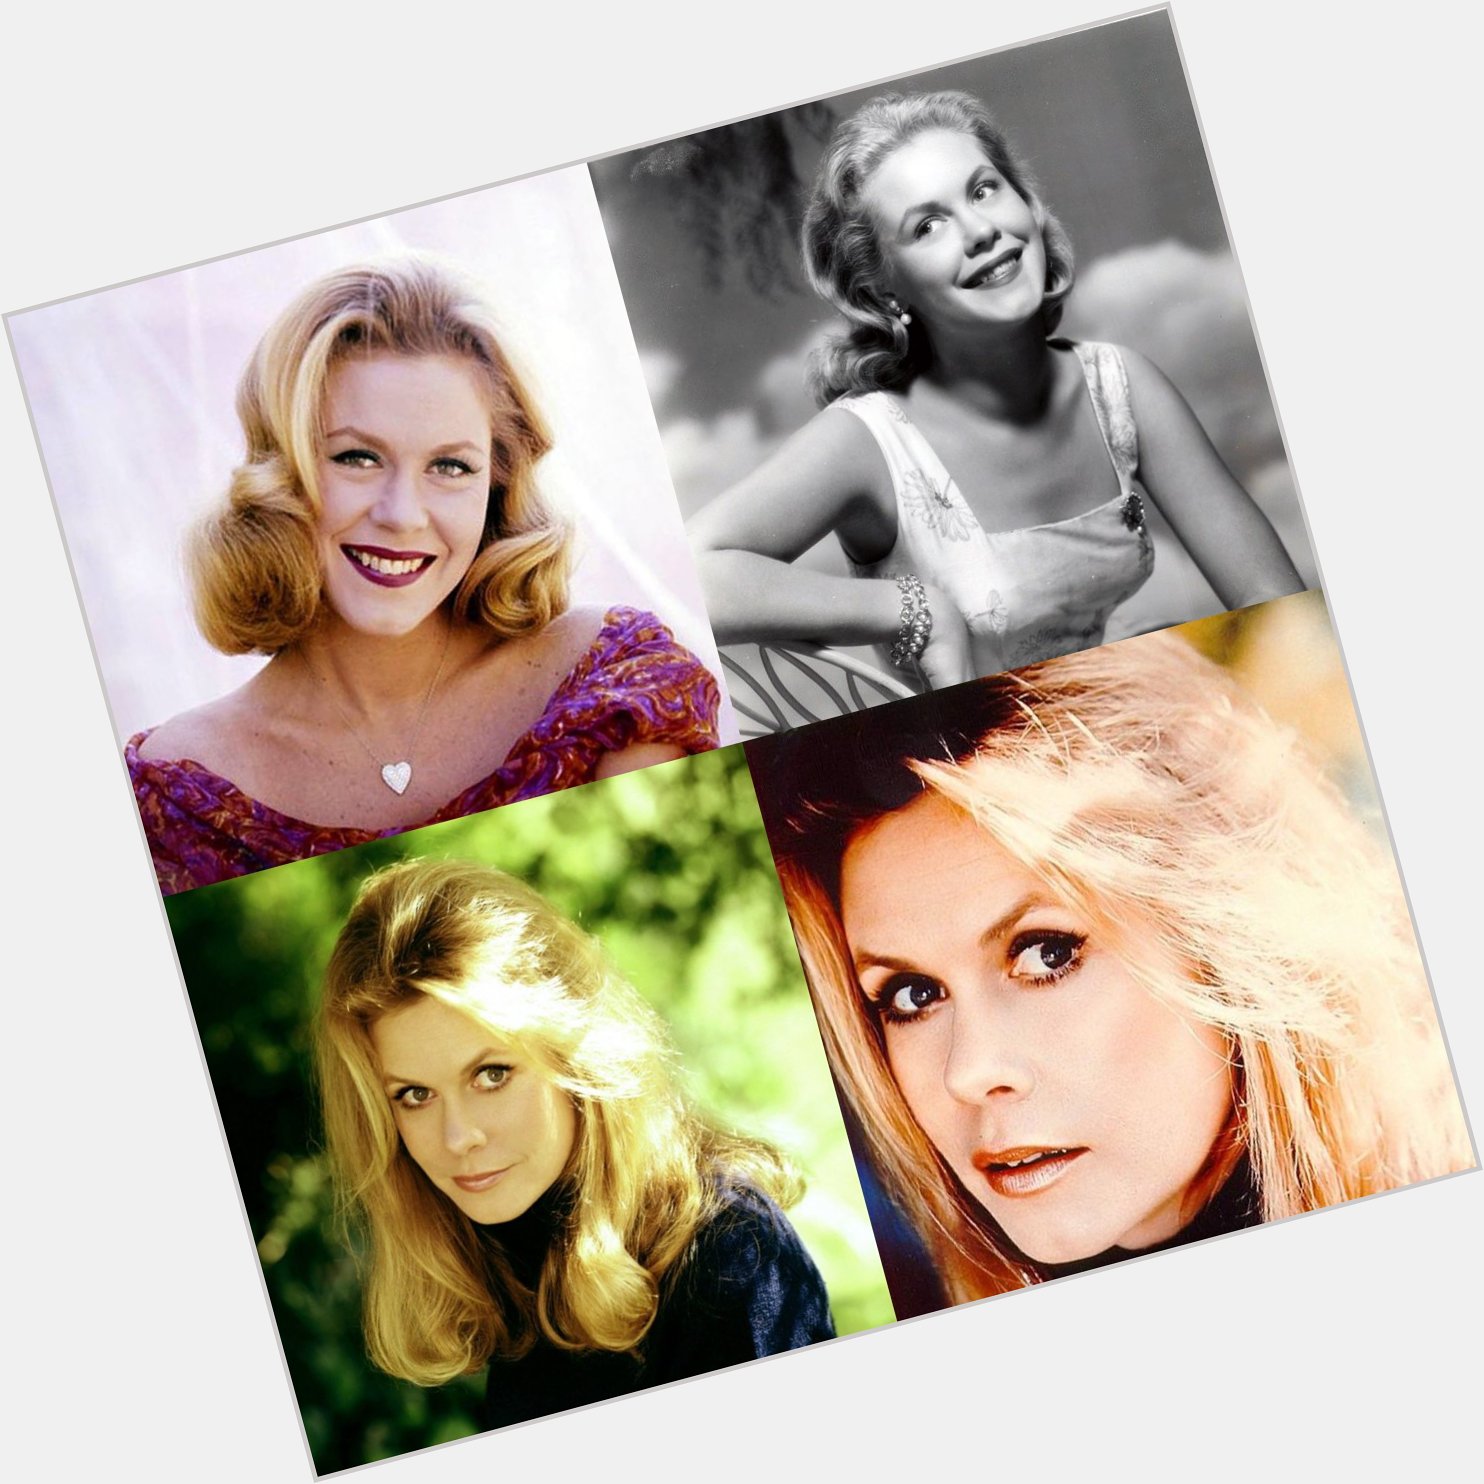 Happy 88 birthday to Elizabeth Montgomery up in heaven. May she Rest In Peace.  